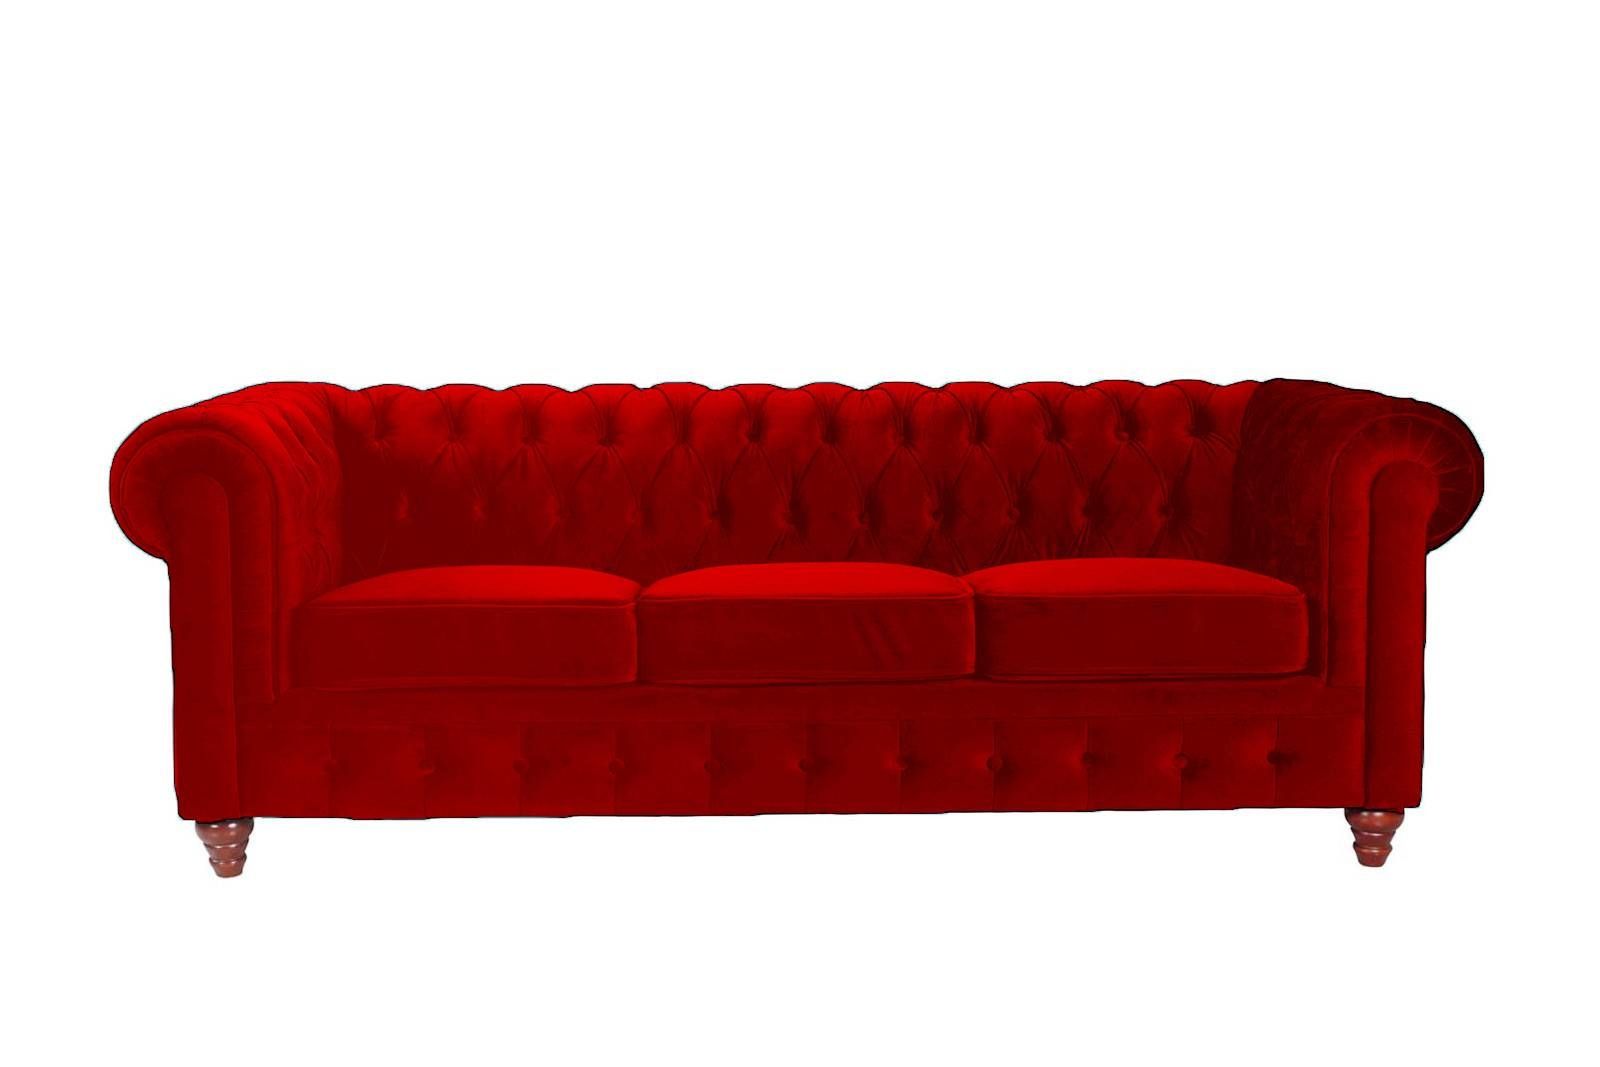 Classic Scroll Arm Tufted Velvet Chesterfield Large Sofa – Walmart With Purple Chesterfield Sofas (View 7 of 15)